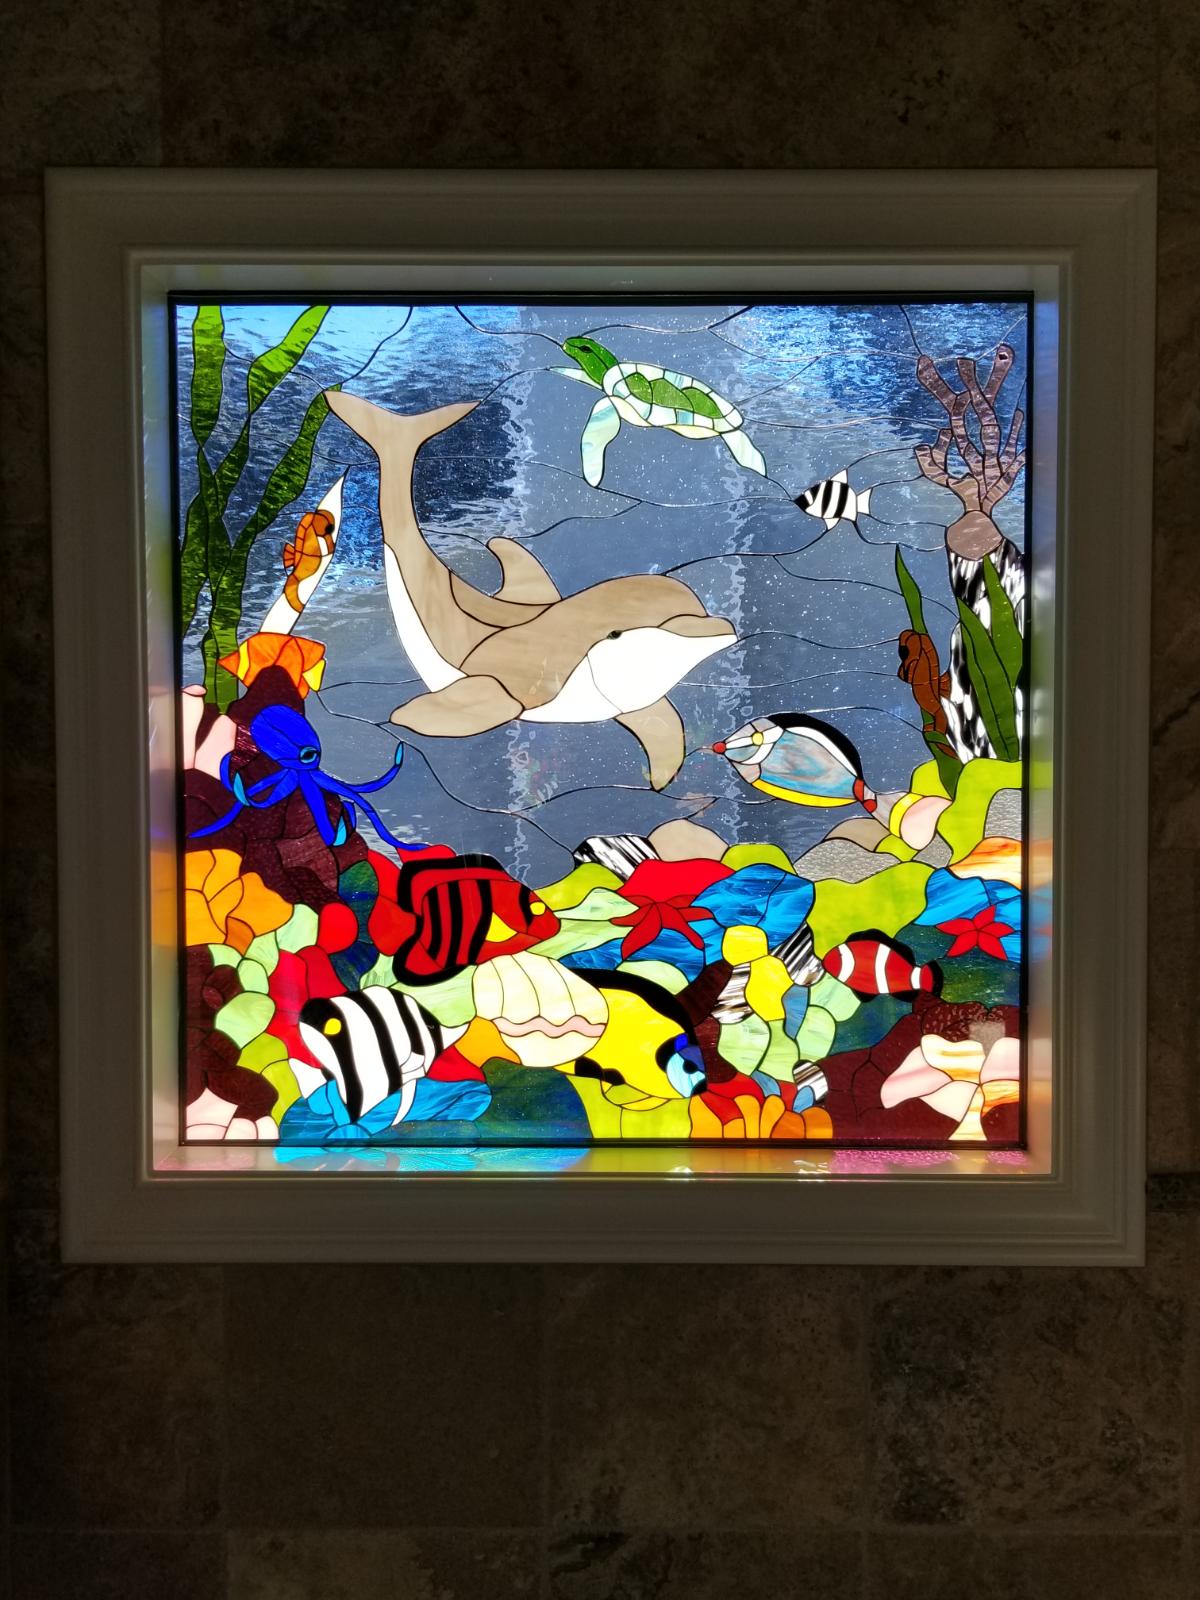 Incredible Colors! Dolphin, Sealife, and Coral Stained Glass Window Installed In A Bathroom